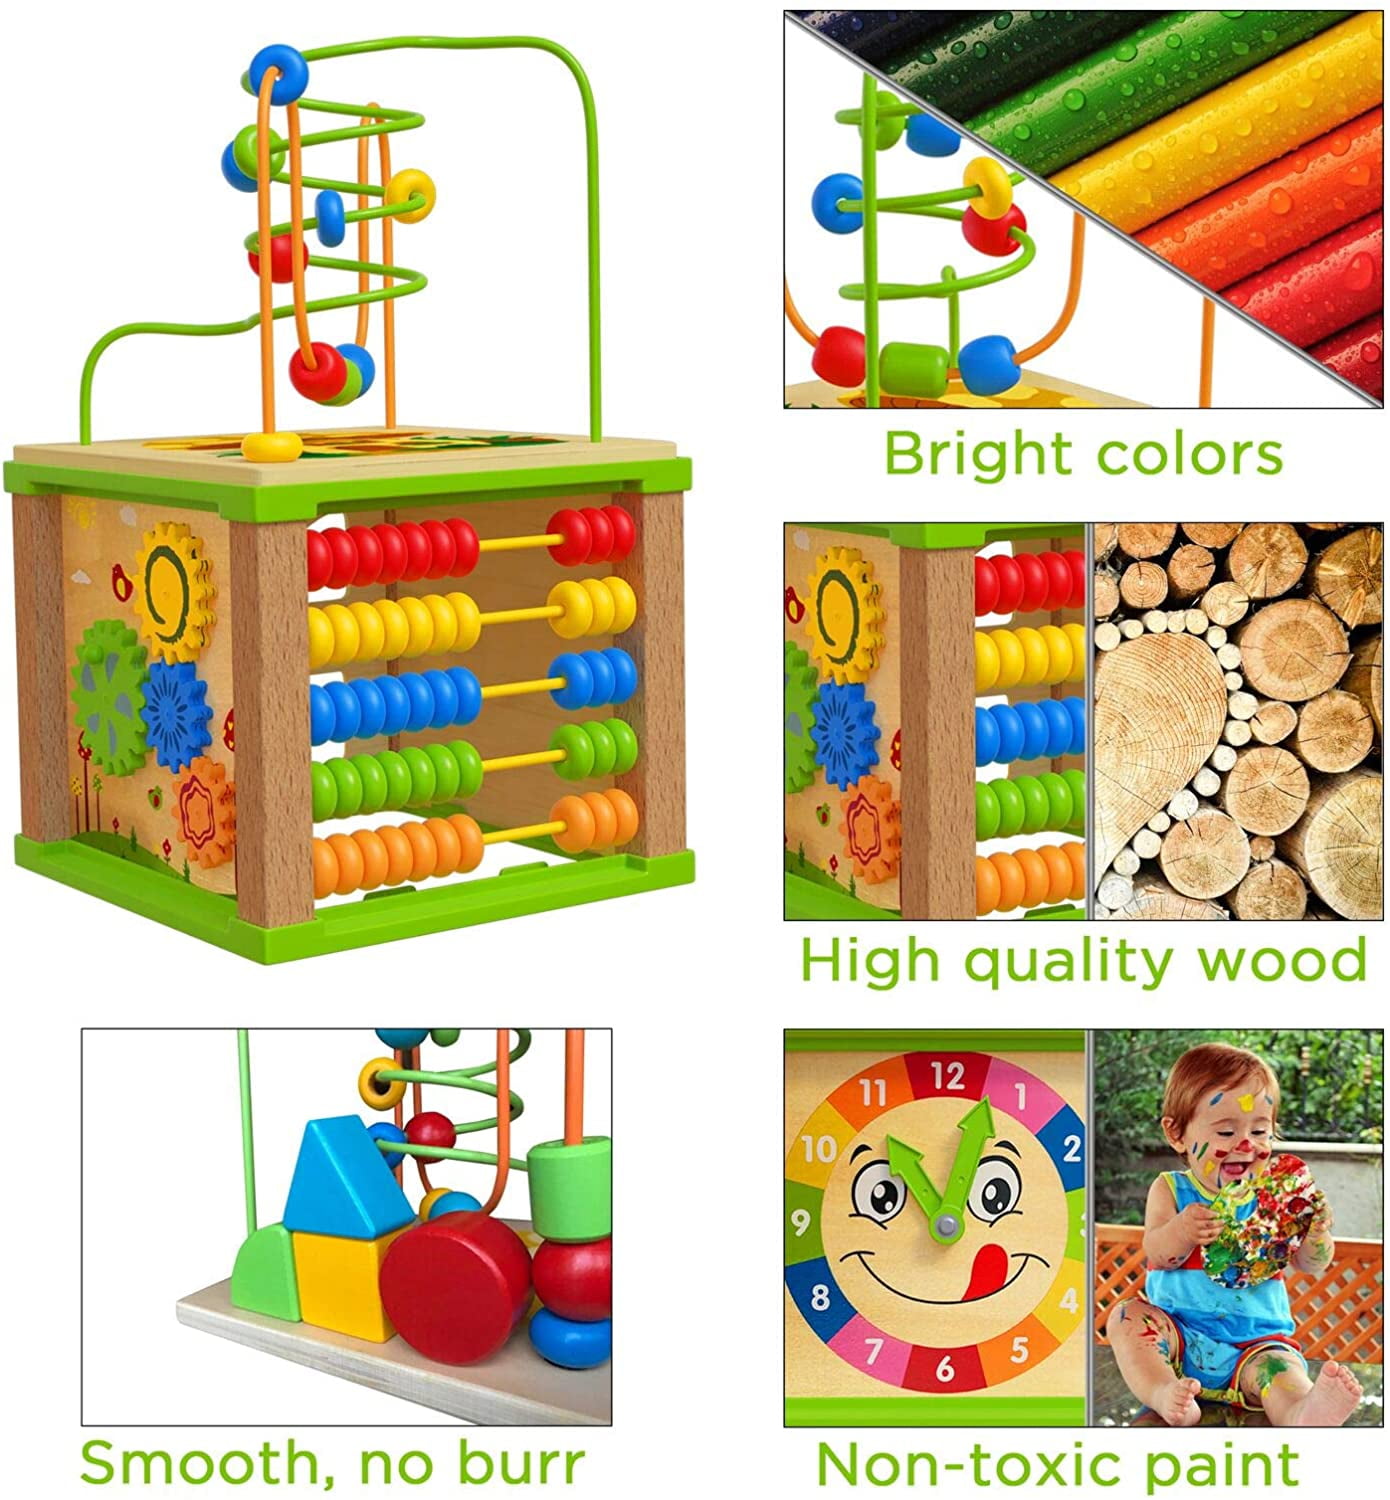 Girl Toys Age 8-10 Years Old 4 Year Old Girl Toys Wooden Knowledge  Classification Box Children's Early Education Educational Toys 